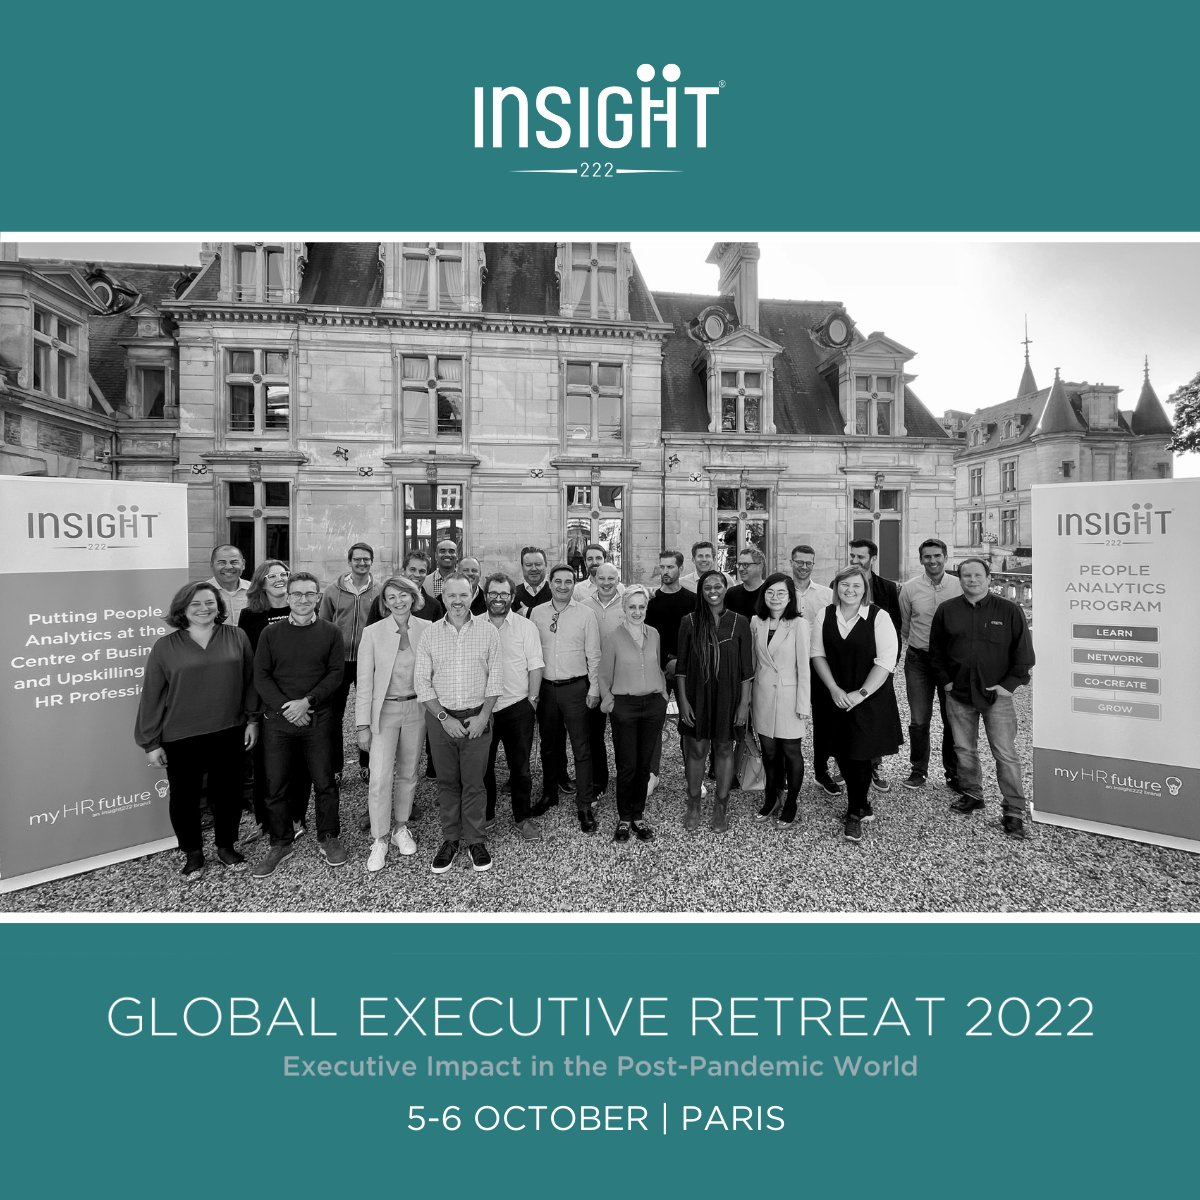 Our #Insight222 #GlobalExecutiveRetreat 2022 Paris was a huge success. Thank you to all who attended & our speakers @RobCrossNetwork & Diane Gherson. If you'd like to learn more about our Insight222 Program and the GER, visit insight222.com/what-we-do-pro… #PeopleAnalytics #HRevent